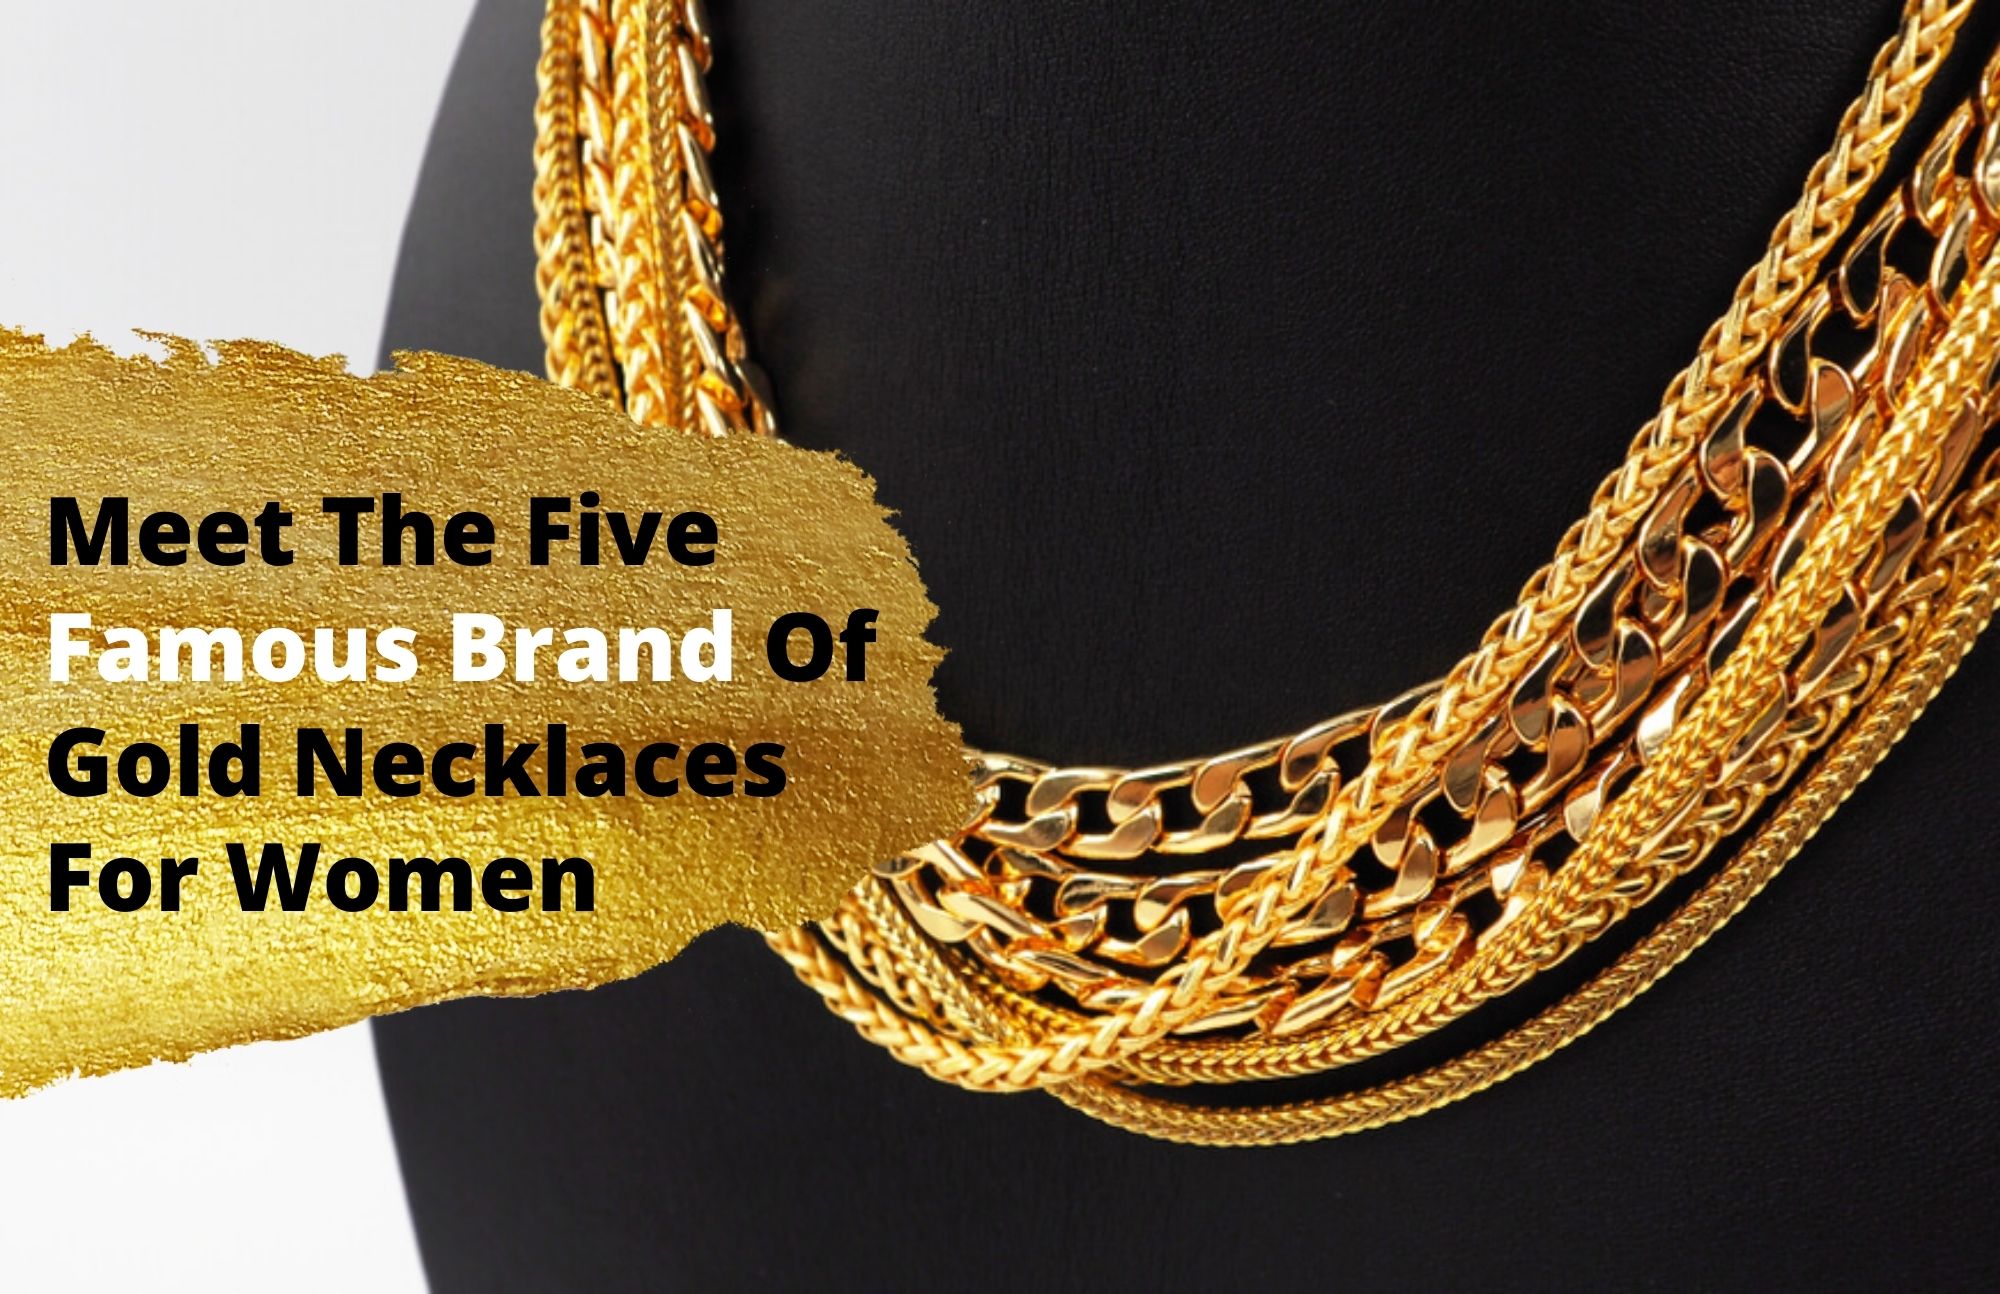 Meet The Five Famous Brand Of Gold Necklaces For Women